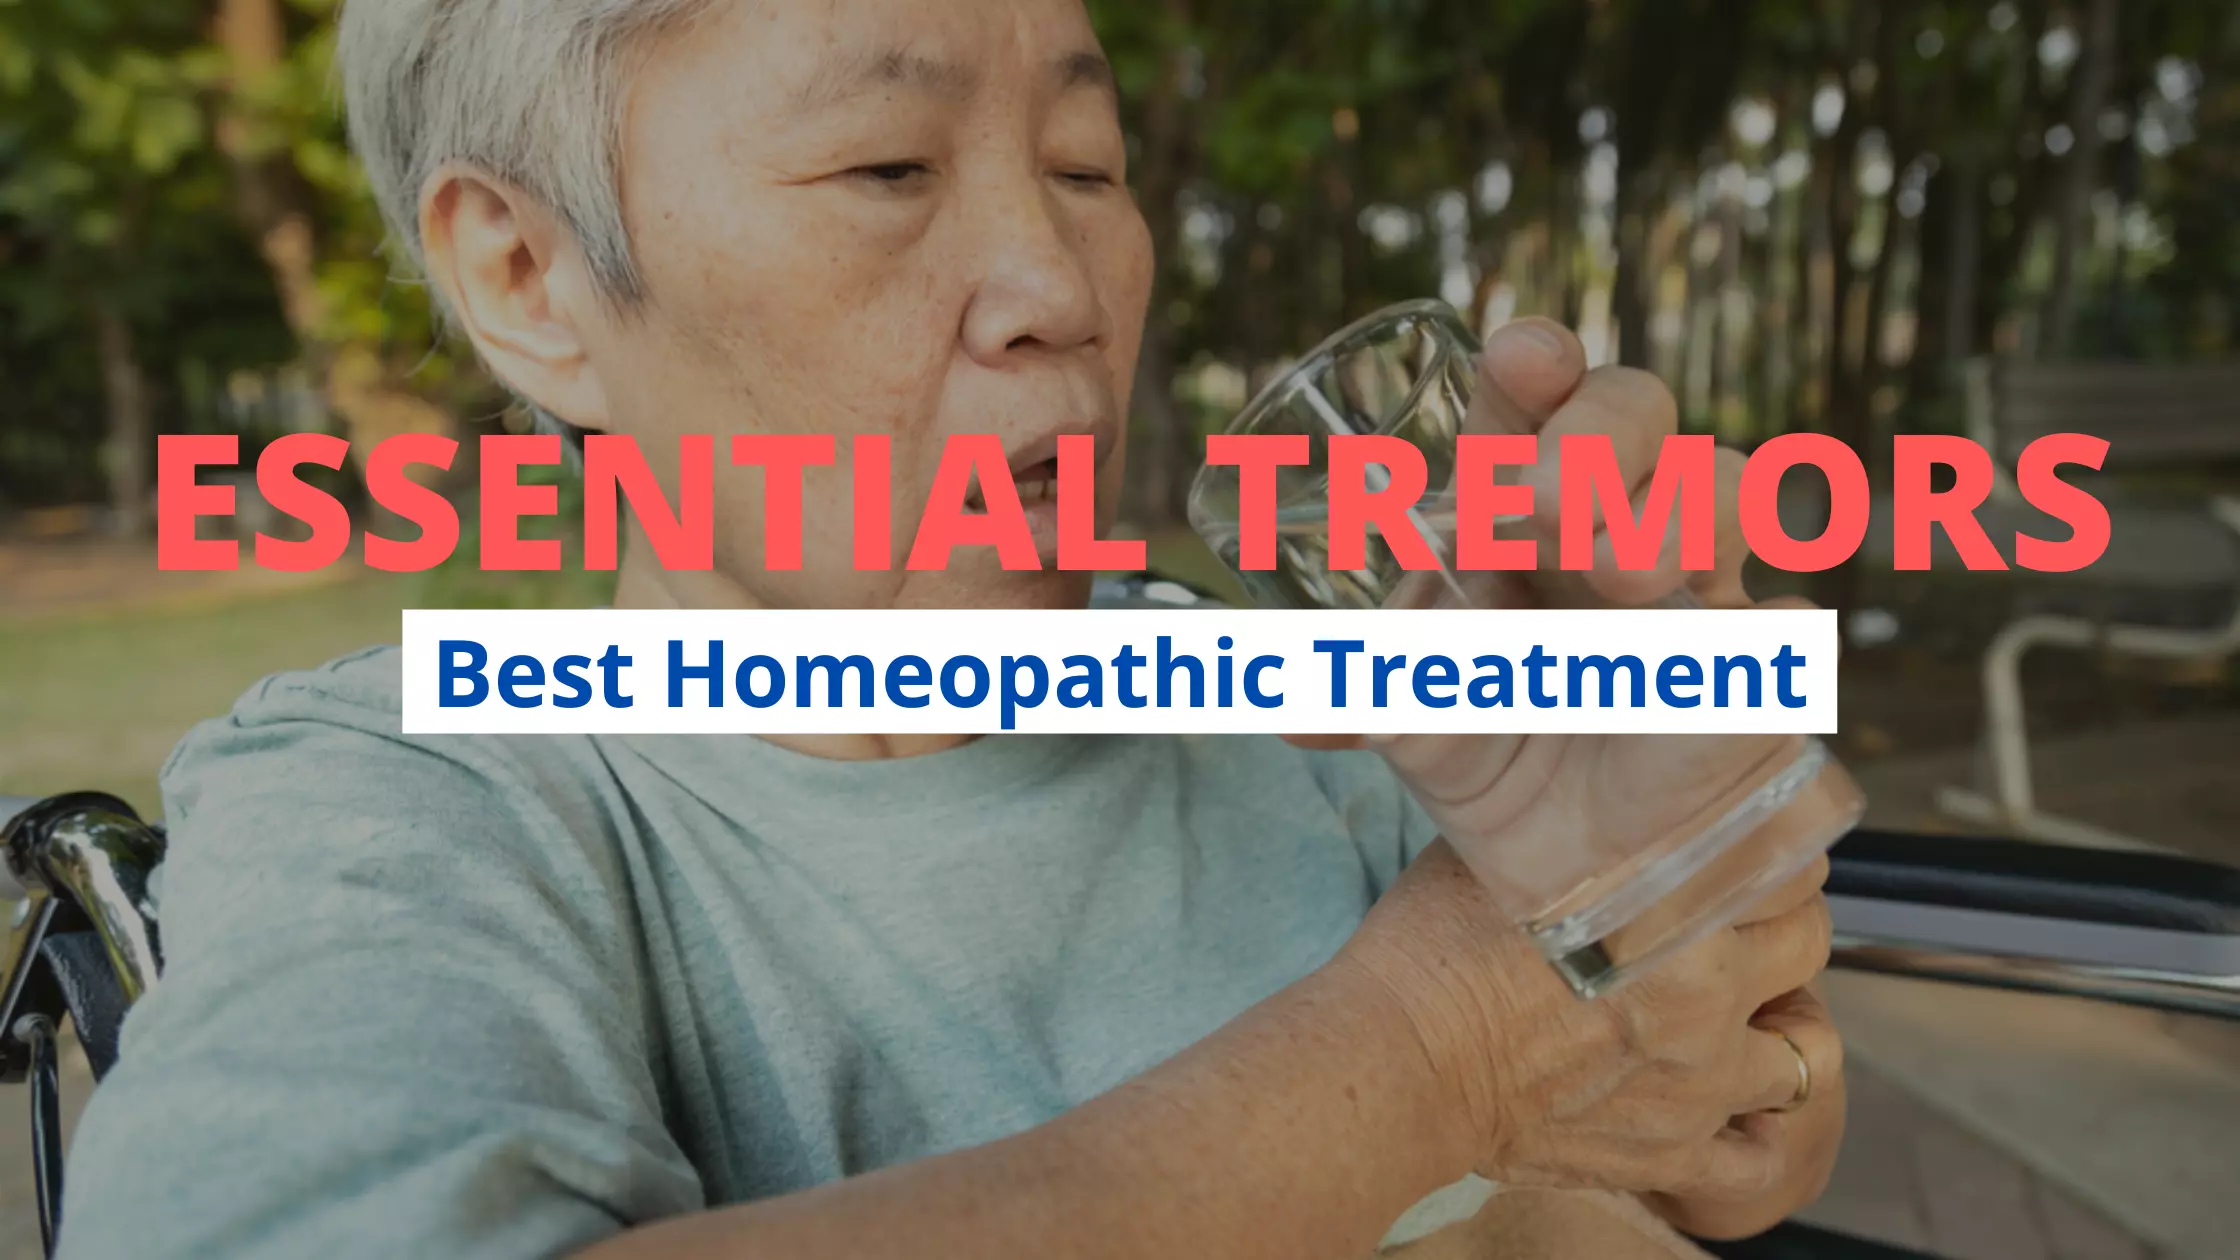 Homeopathic Treatment For Essential Tremors